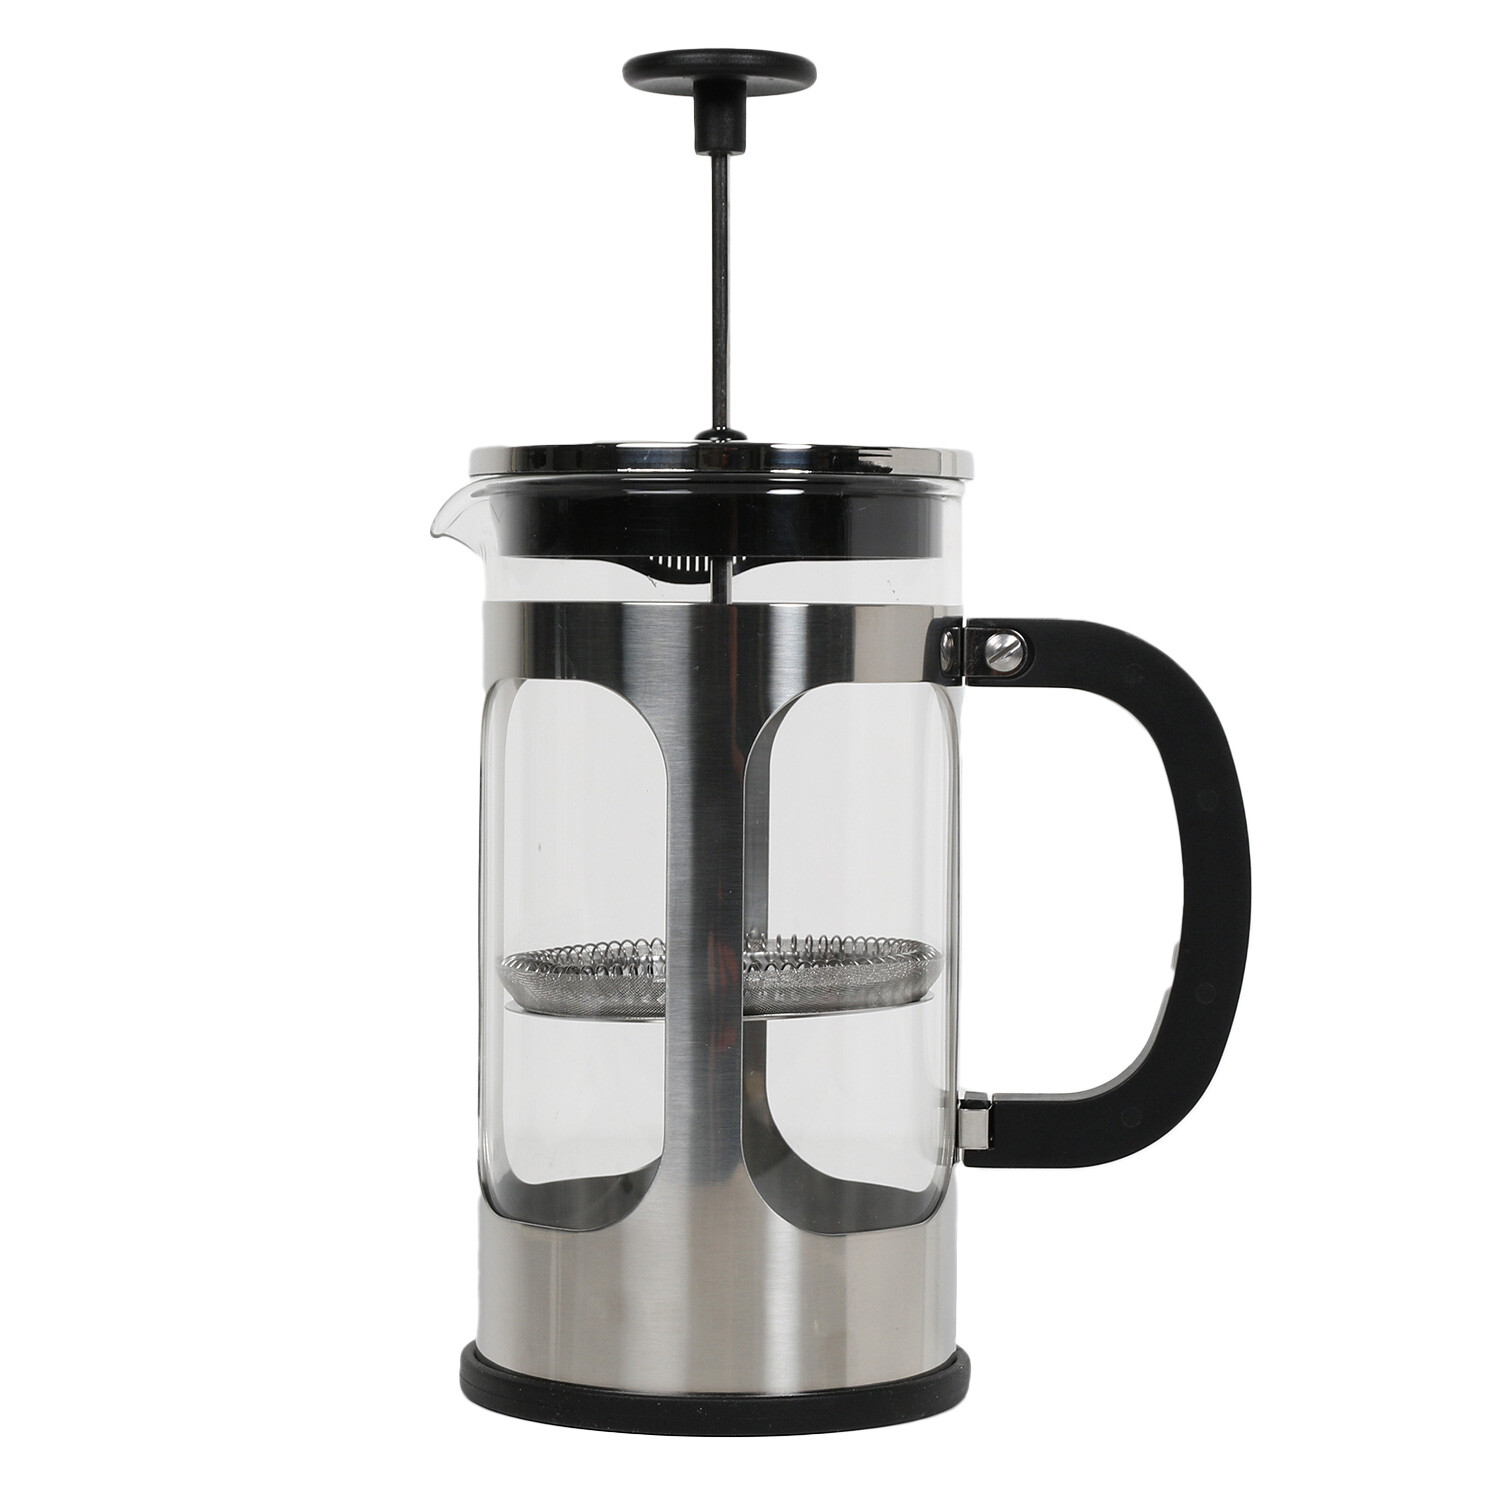 Stainless steel and Glass Cafetiere Image